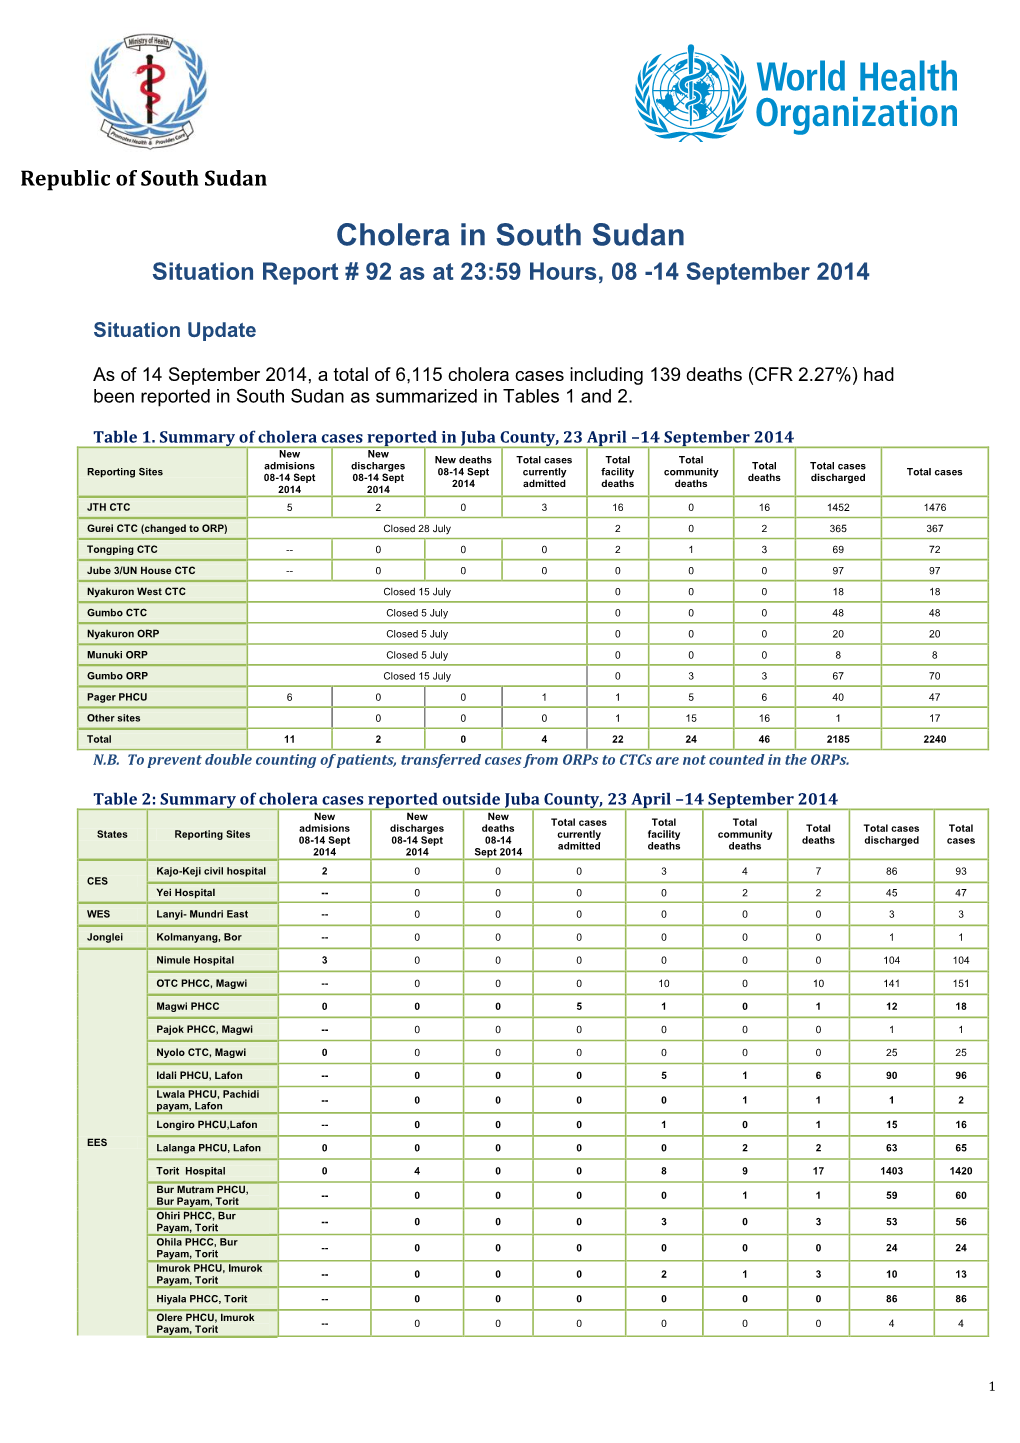 Cholera in South Sudan Situation Report # 92 As at 23:59 Hours, 08 -14 September 2014